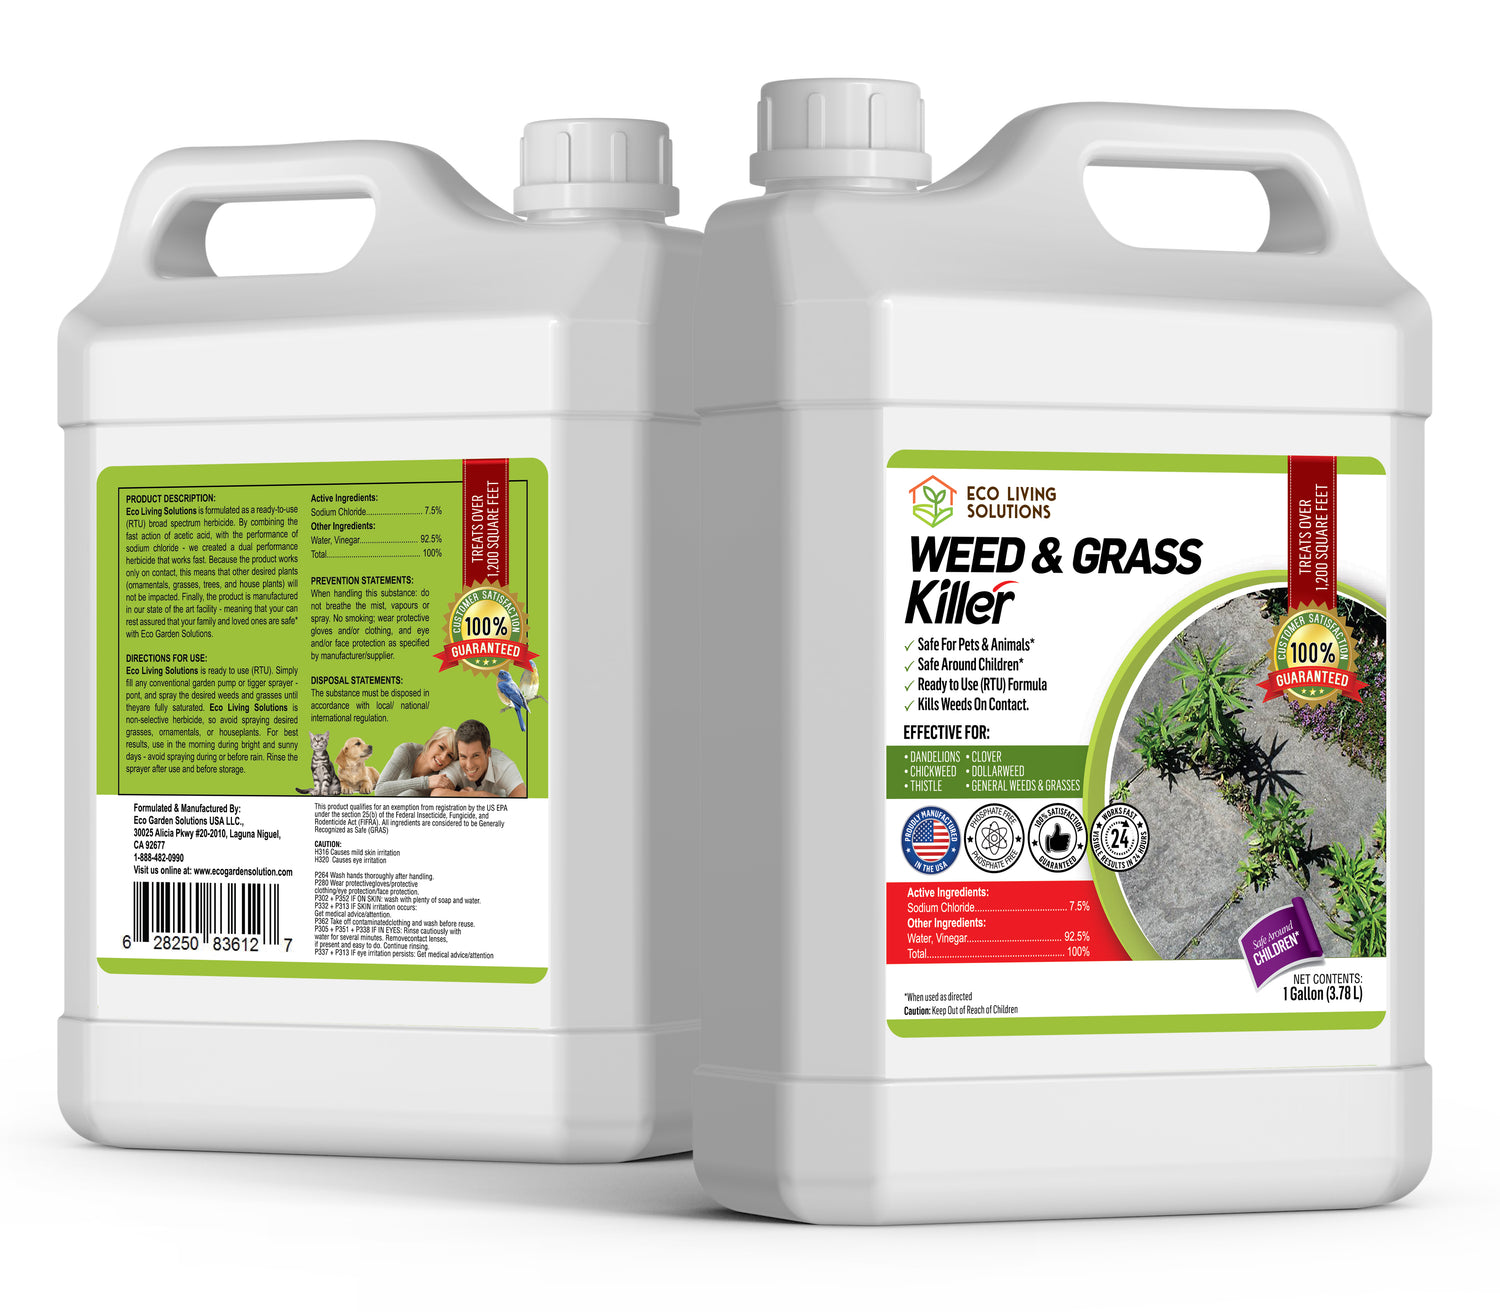 Eco Living Solutions - Pet Safe Organic Weed Killer